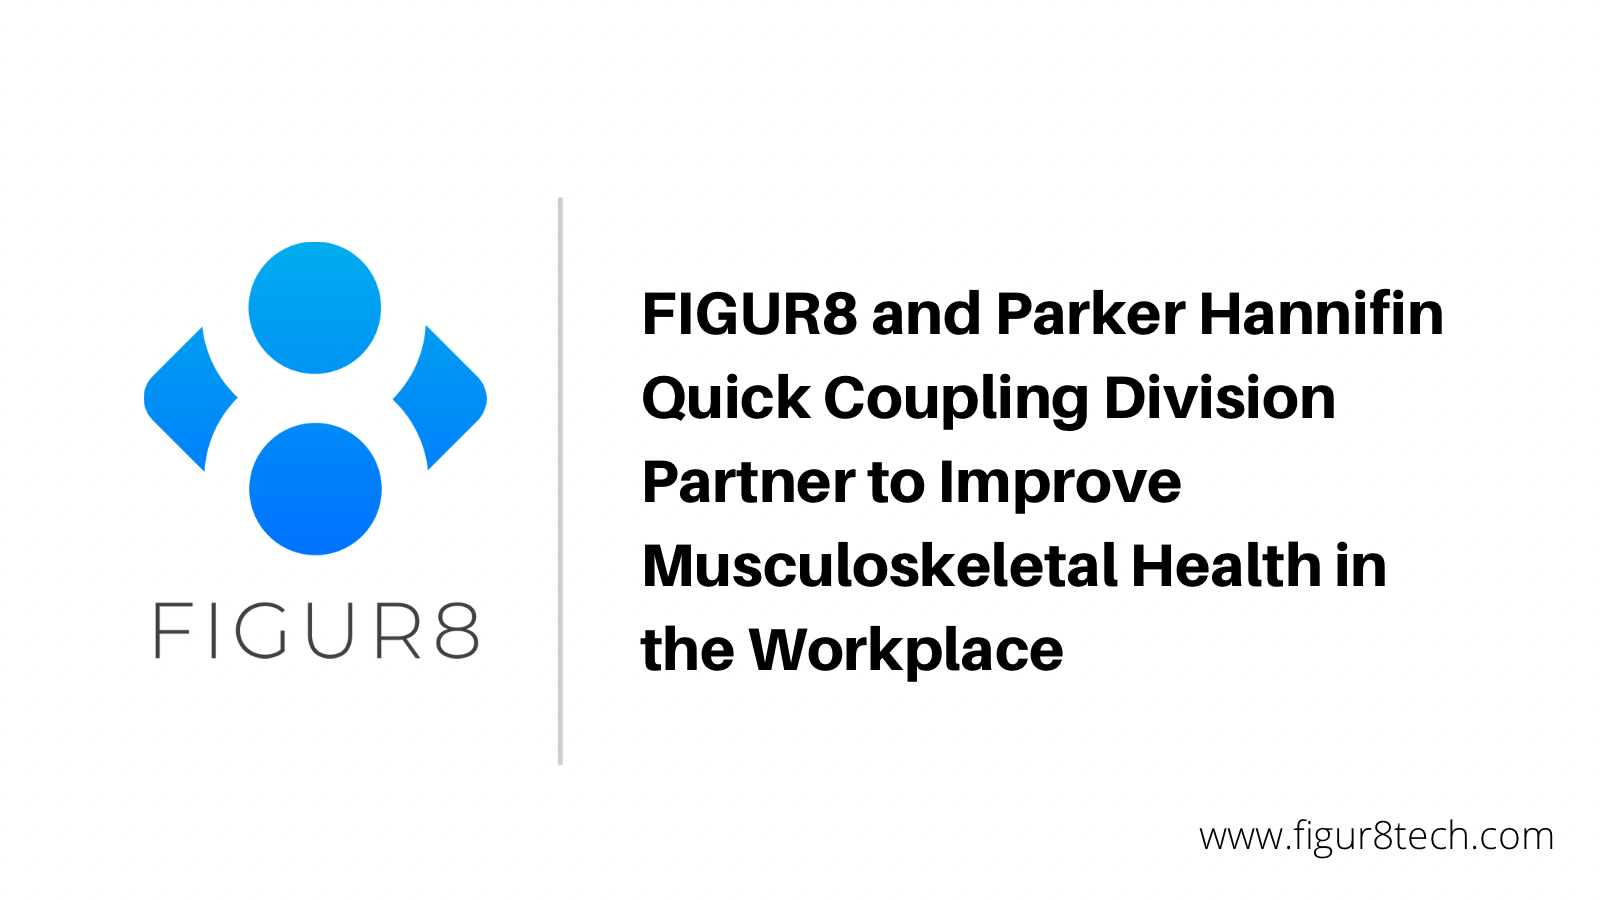 FIGUR8 and Parker Hannifin Quick Coupling Division Partner to Improve Musculoskeletal Health in the Workplace